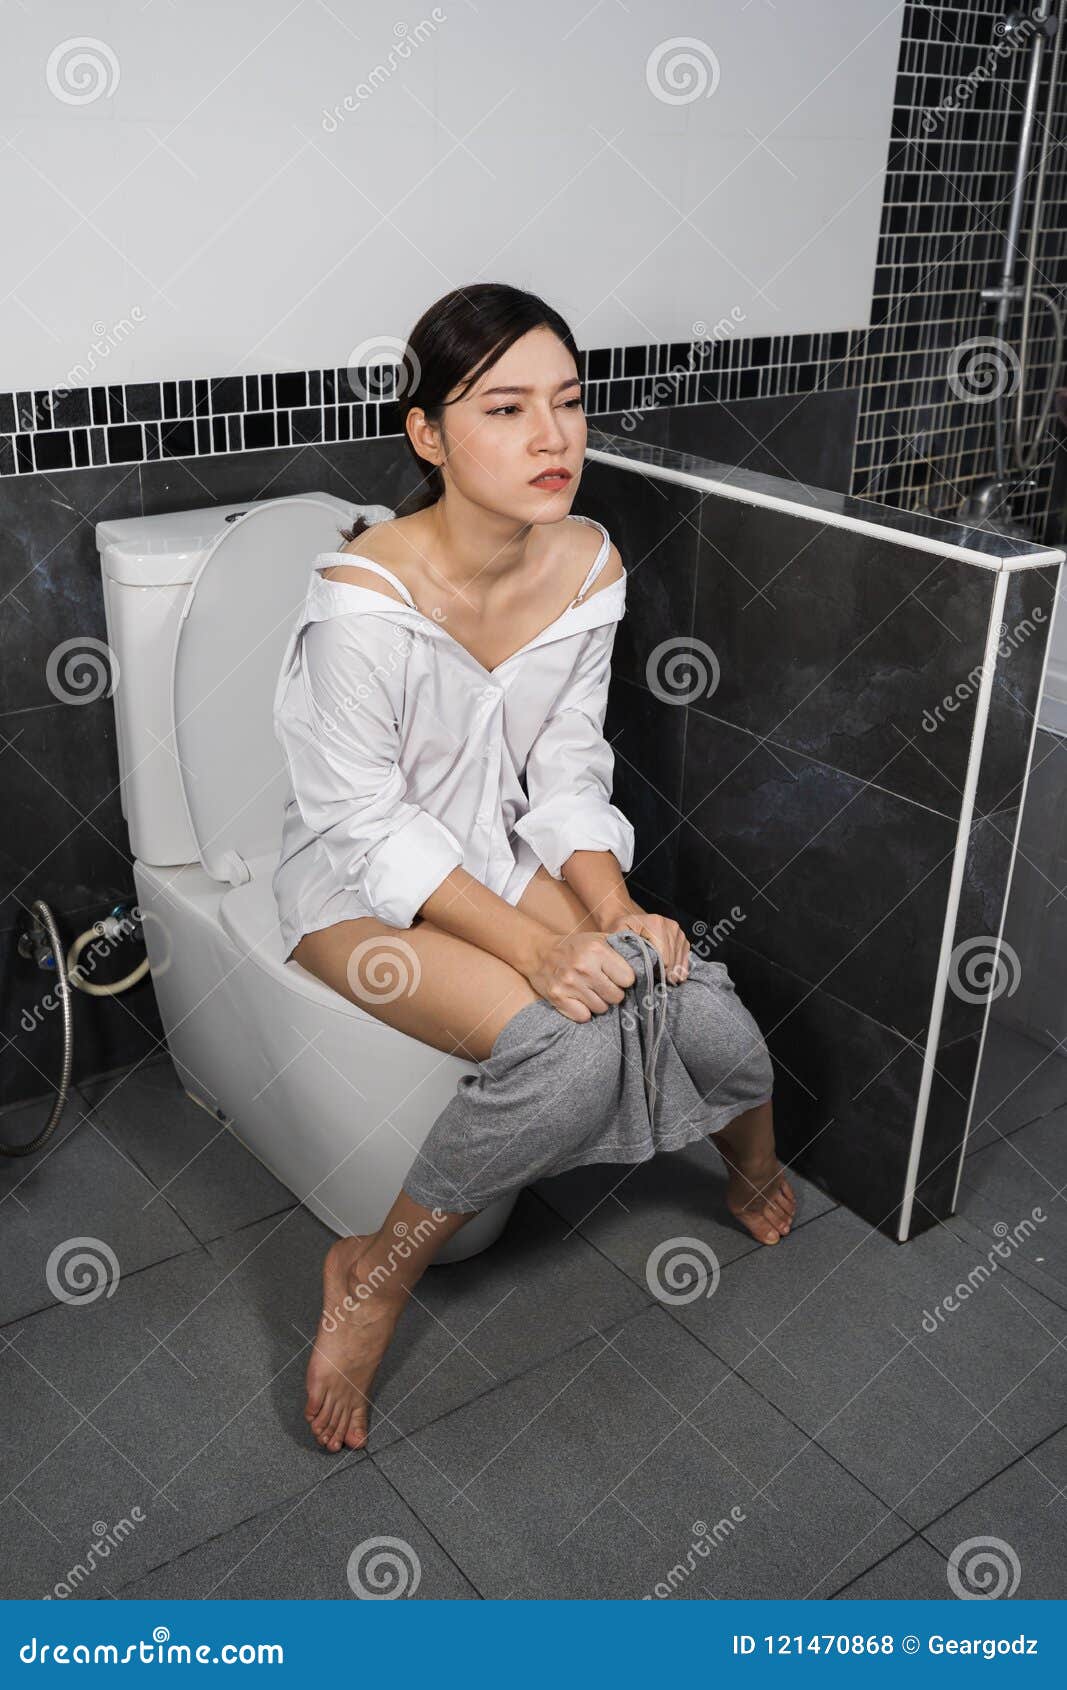 brianna palomino recommends Woman Sitting On The Toilet Pictures